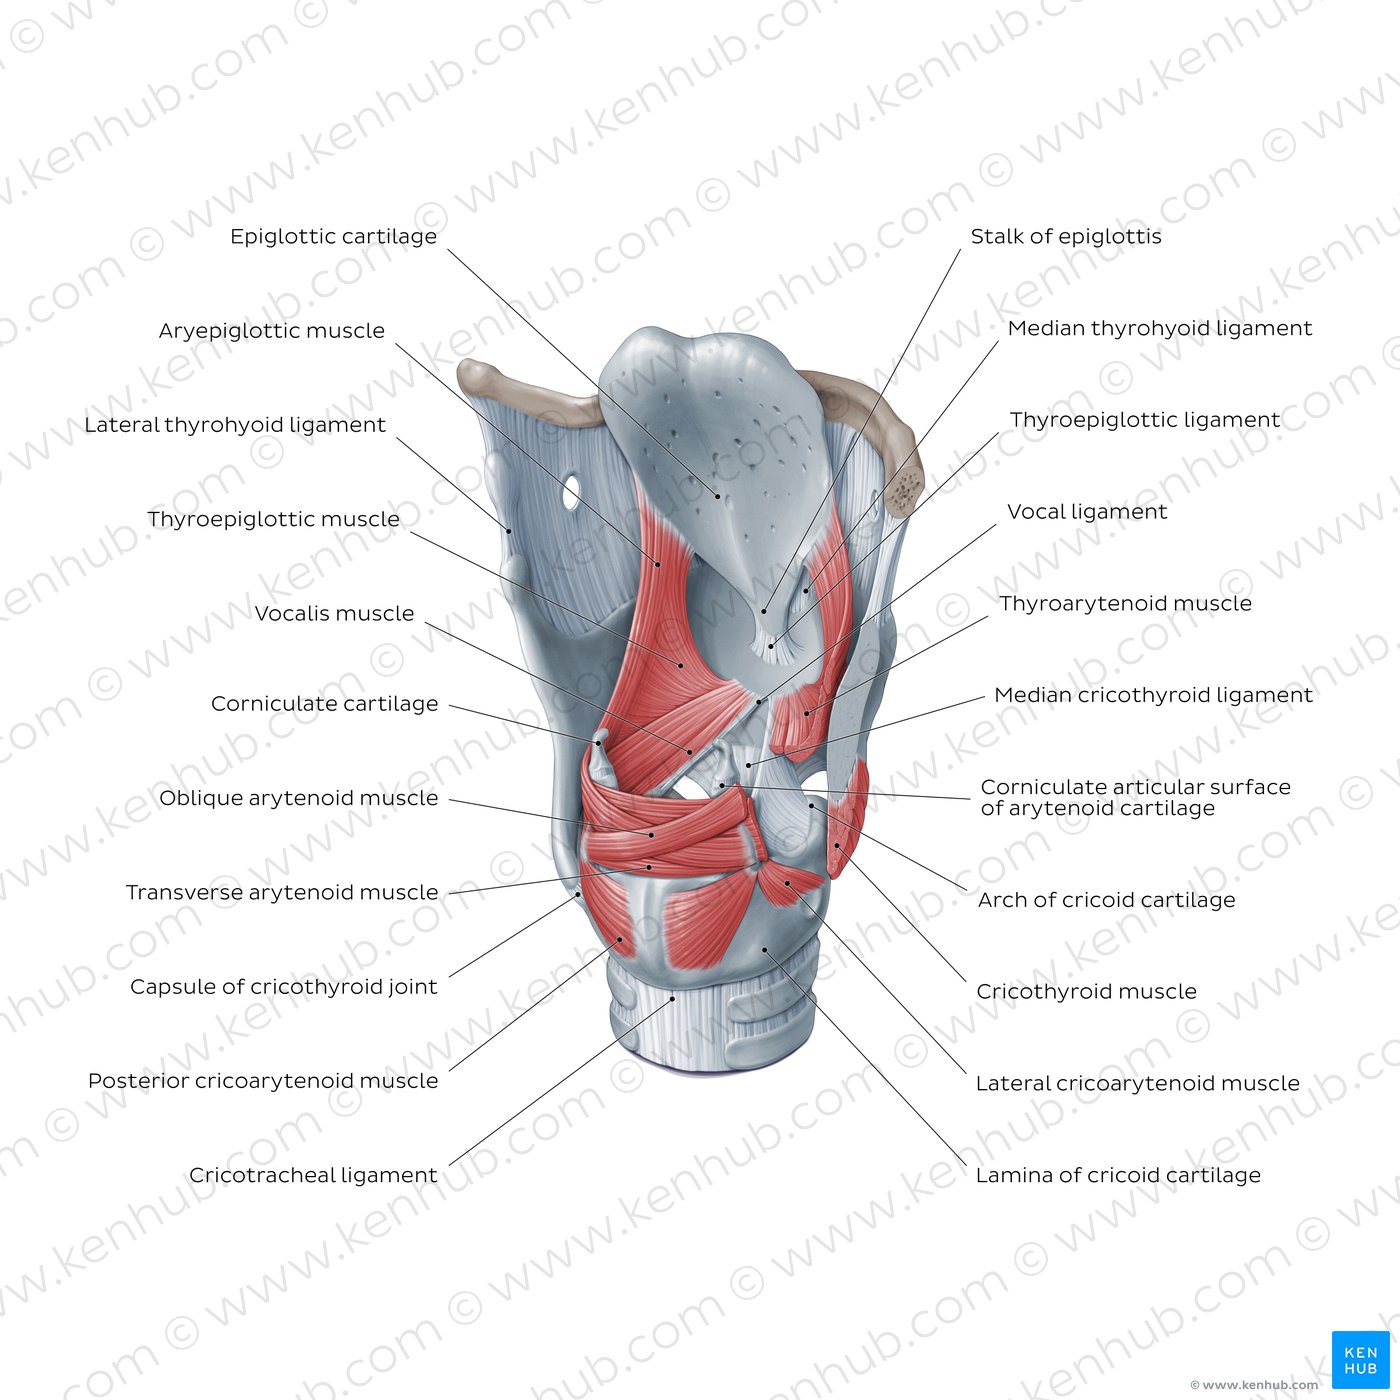 Diagram of the posterolateral view of the larynx, showing its cartilages, ligaments muscles.